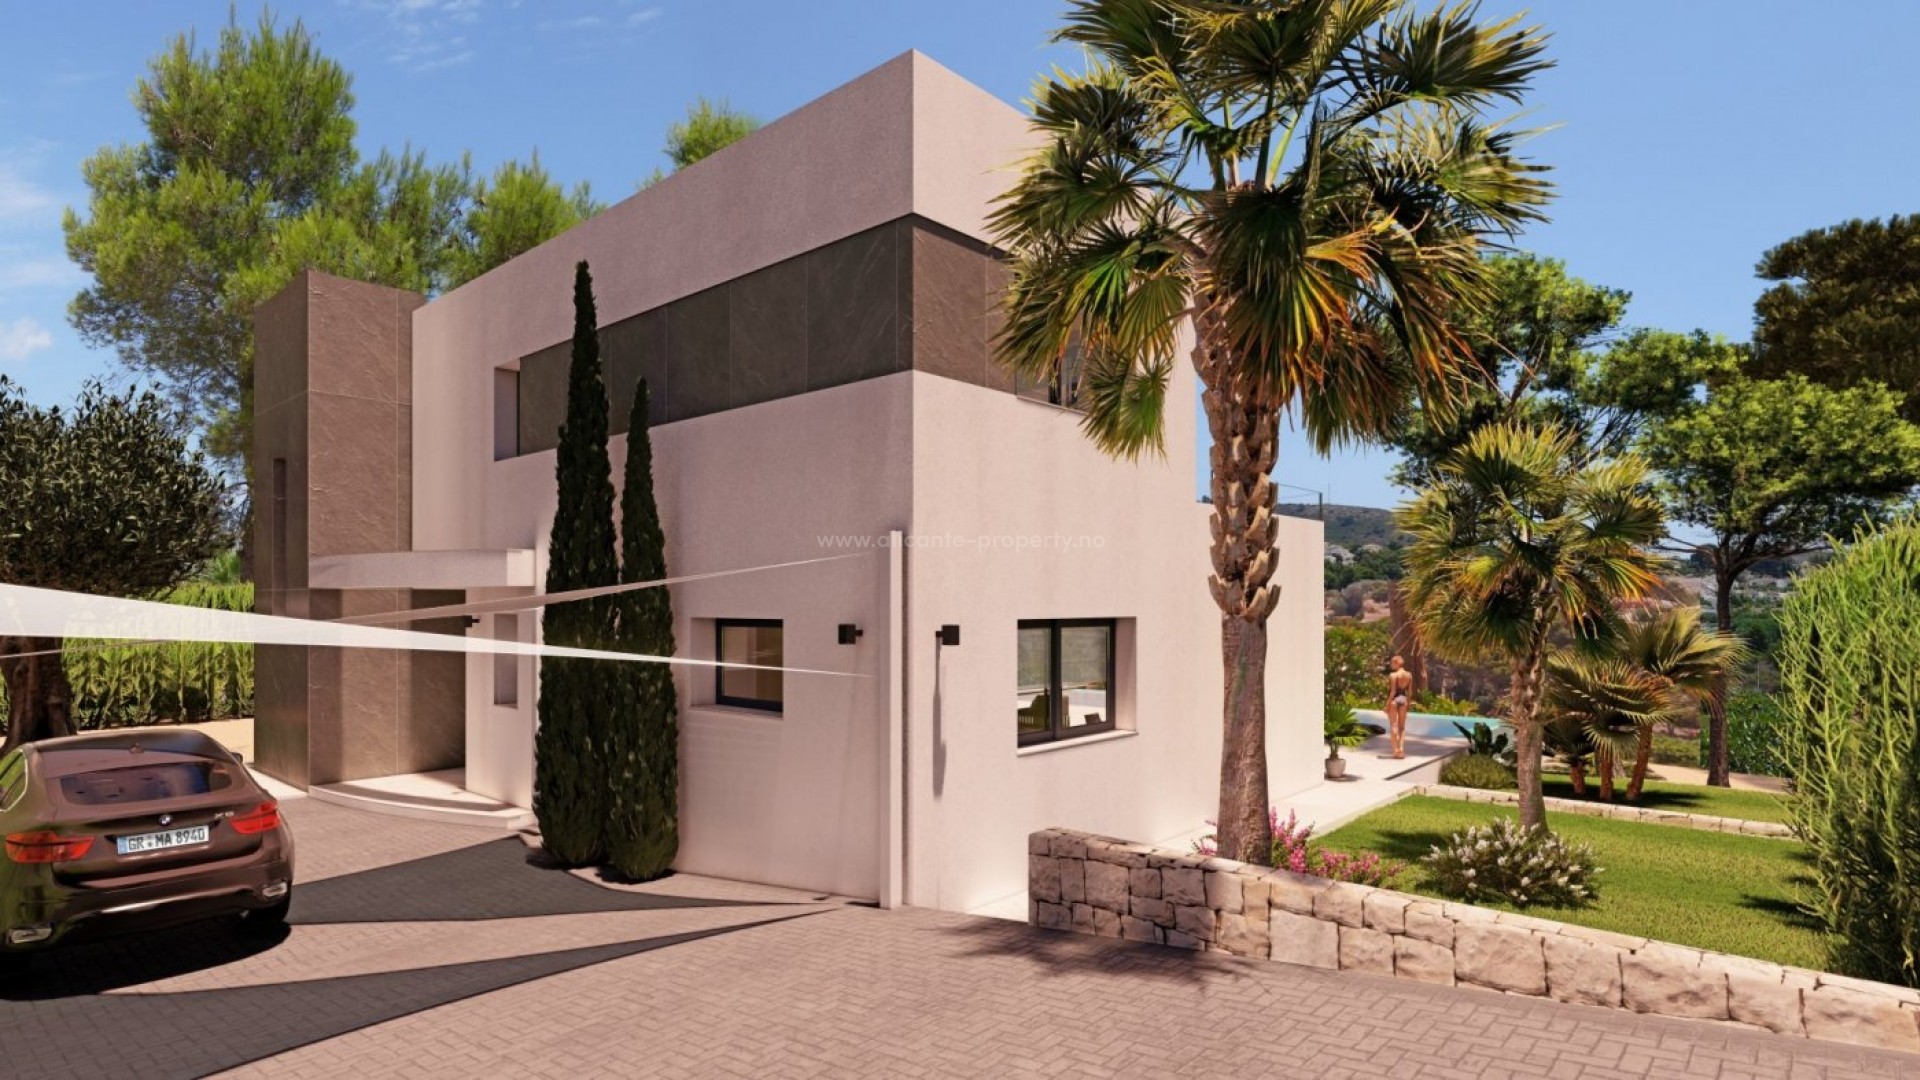 Luxury villa in Moraira. Walking distance to the beautiful beaches and the centre, 280m2 on 2 floors + swimming pool and basement with double garage and laundry room.